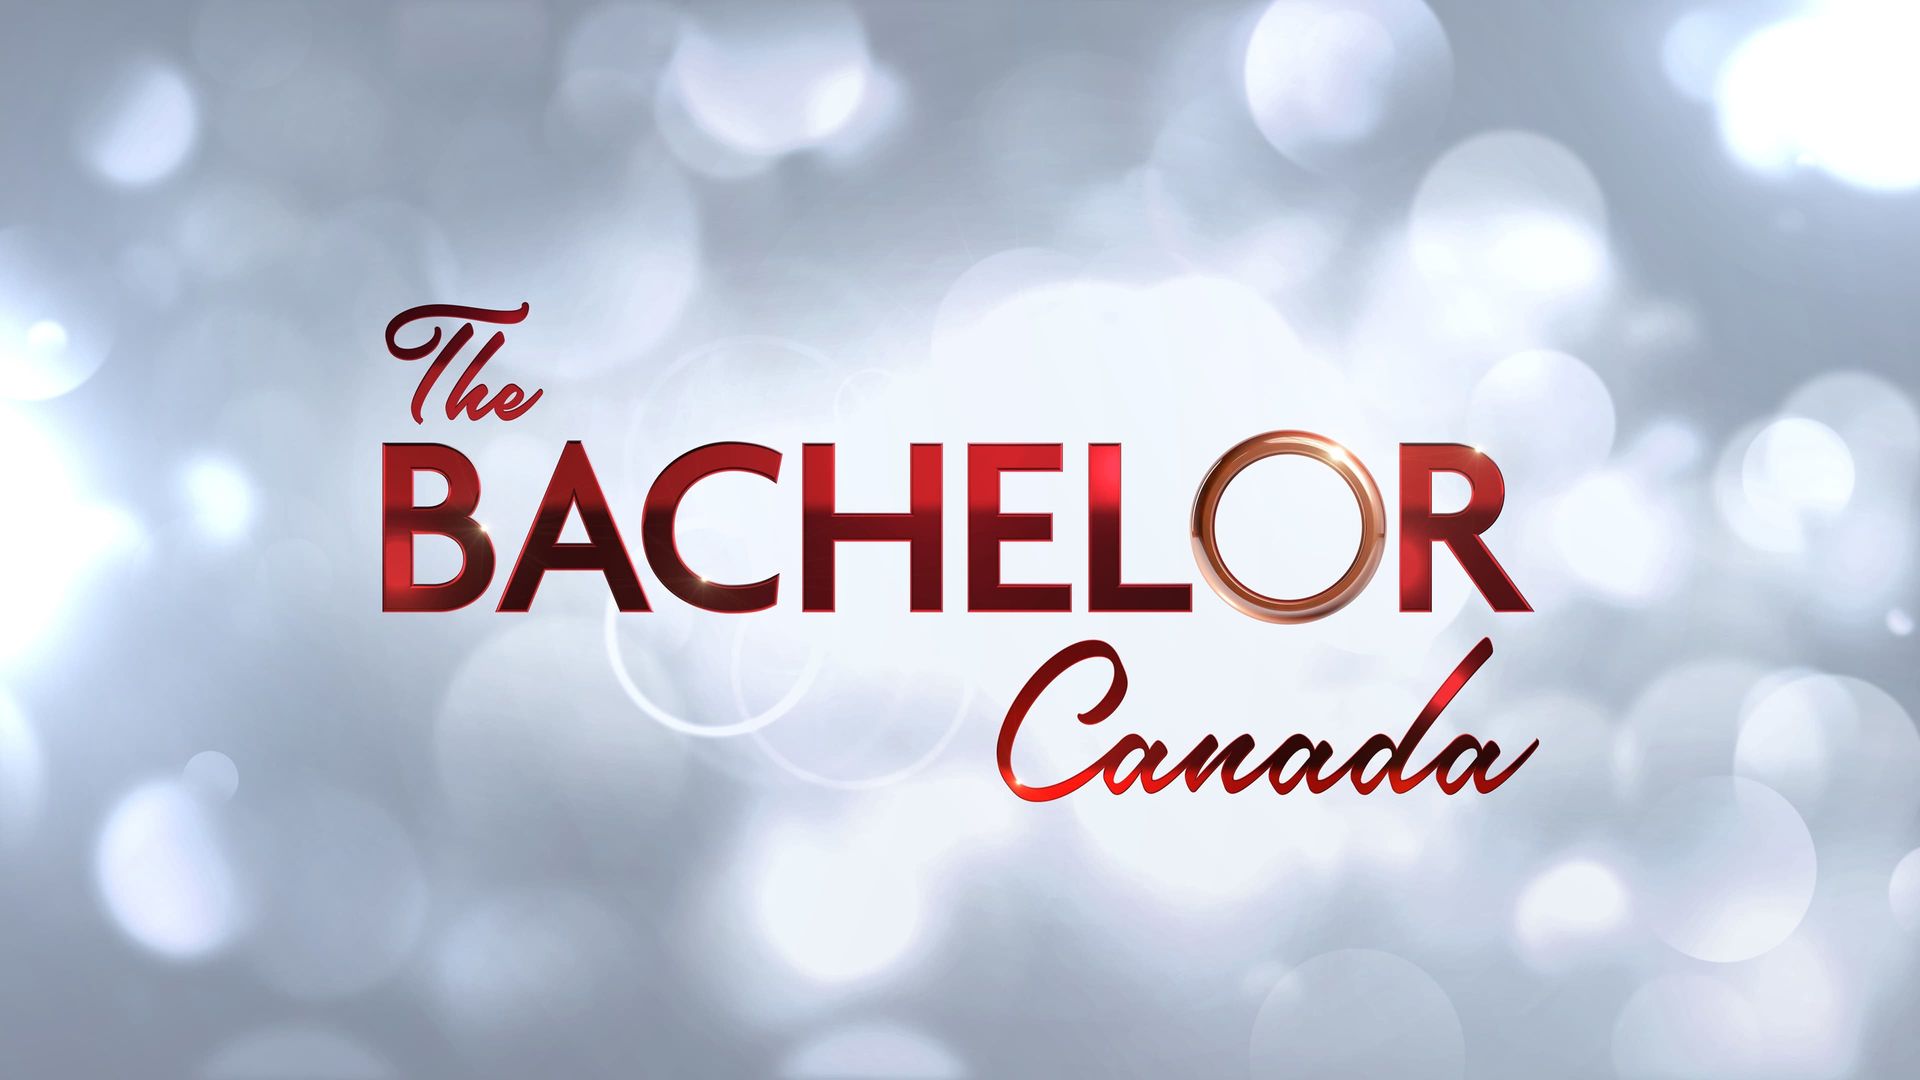 The Bachelor Canada background